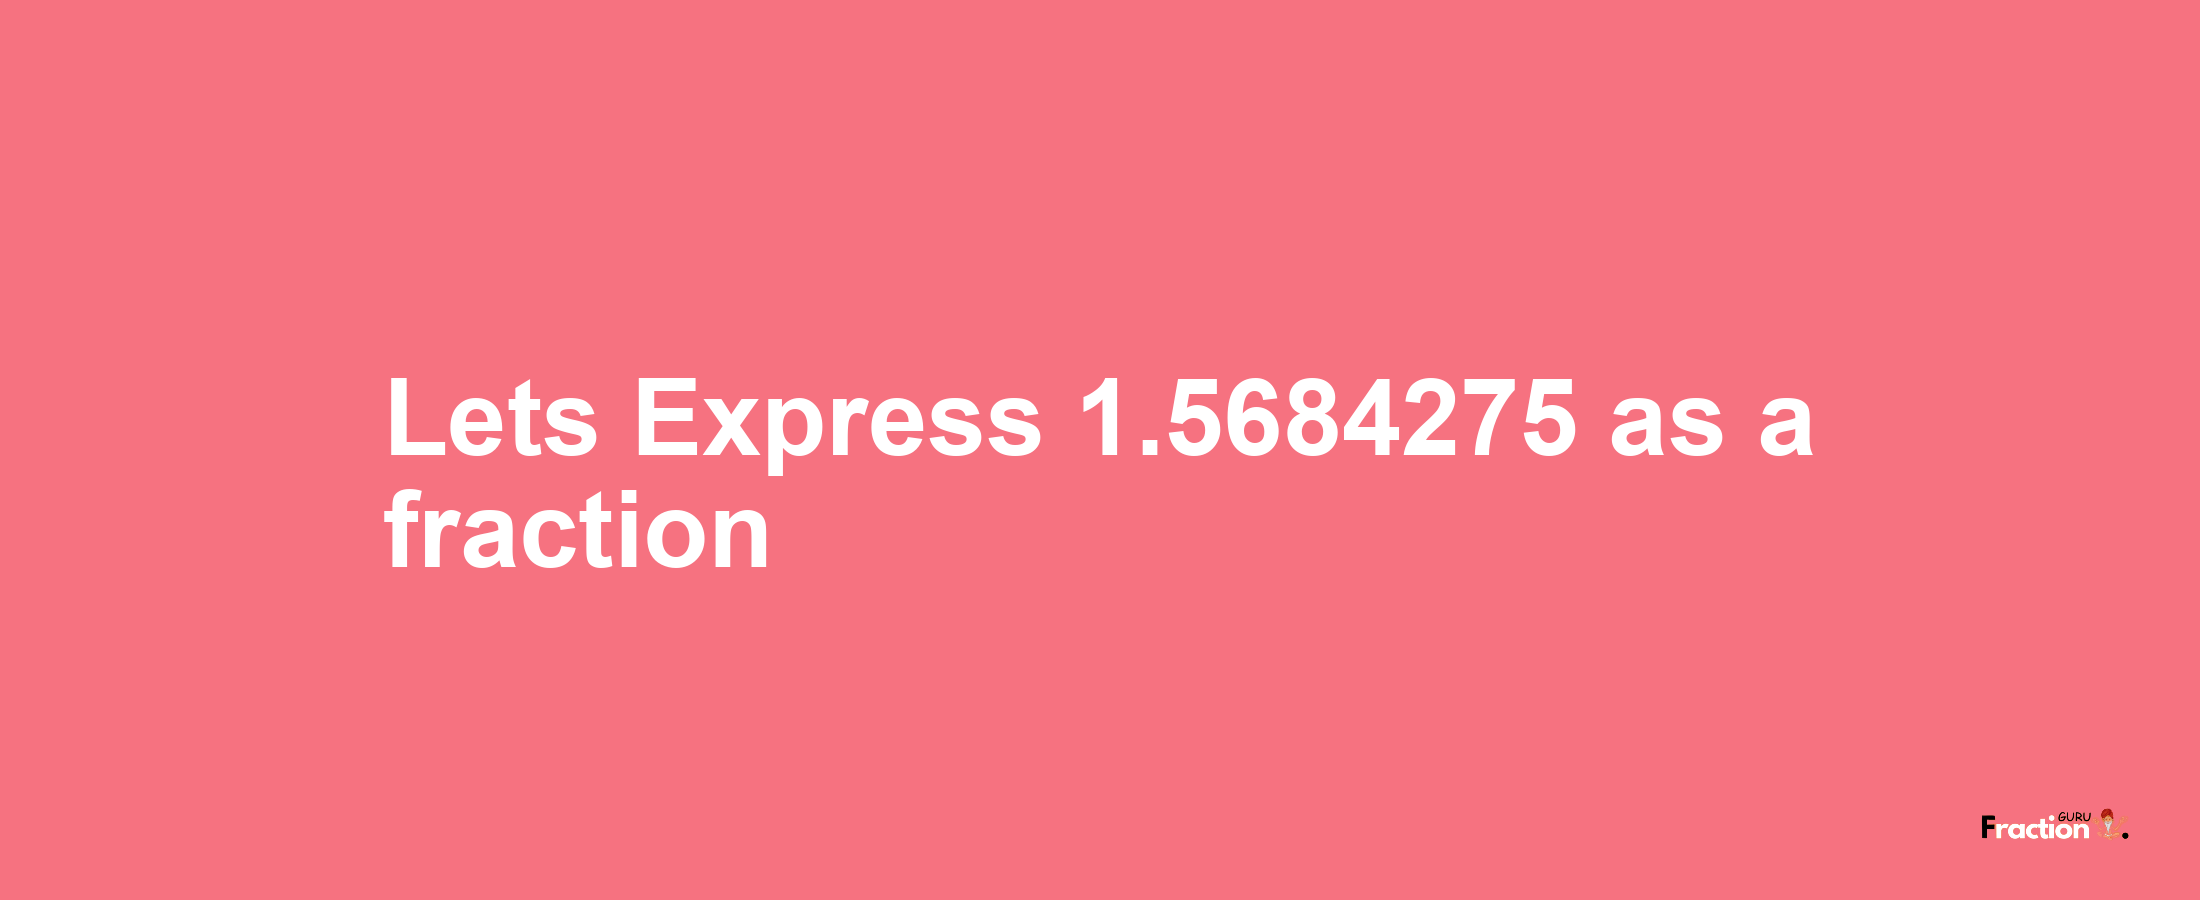 Lets Express 1.5684275 as afraction